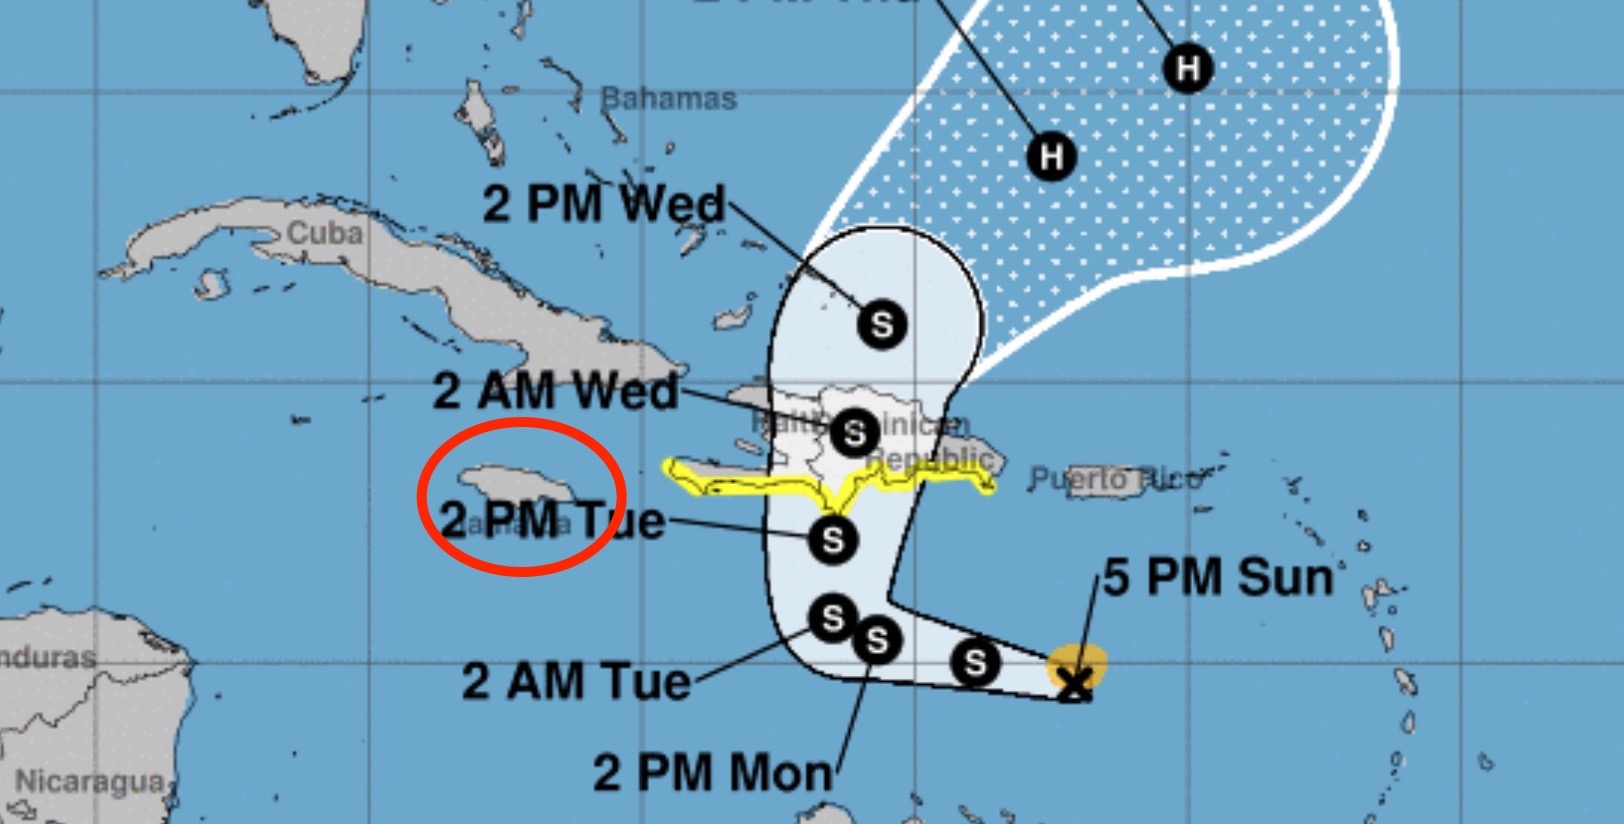 The Tropics Very Active with Bad Weather: Jamaicans on the Lookout! - See Graphs